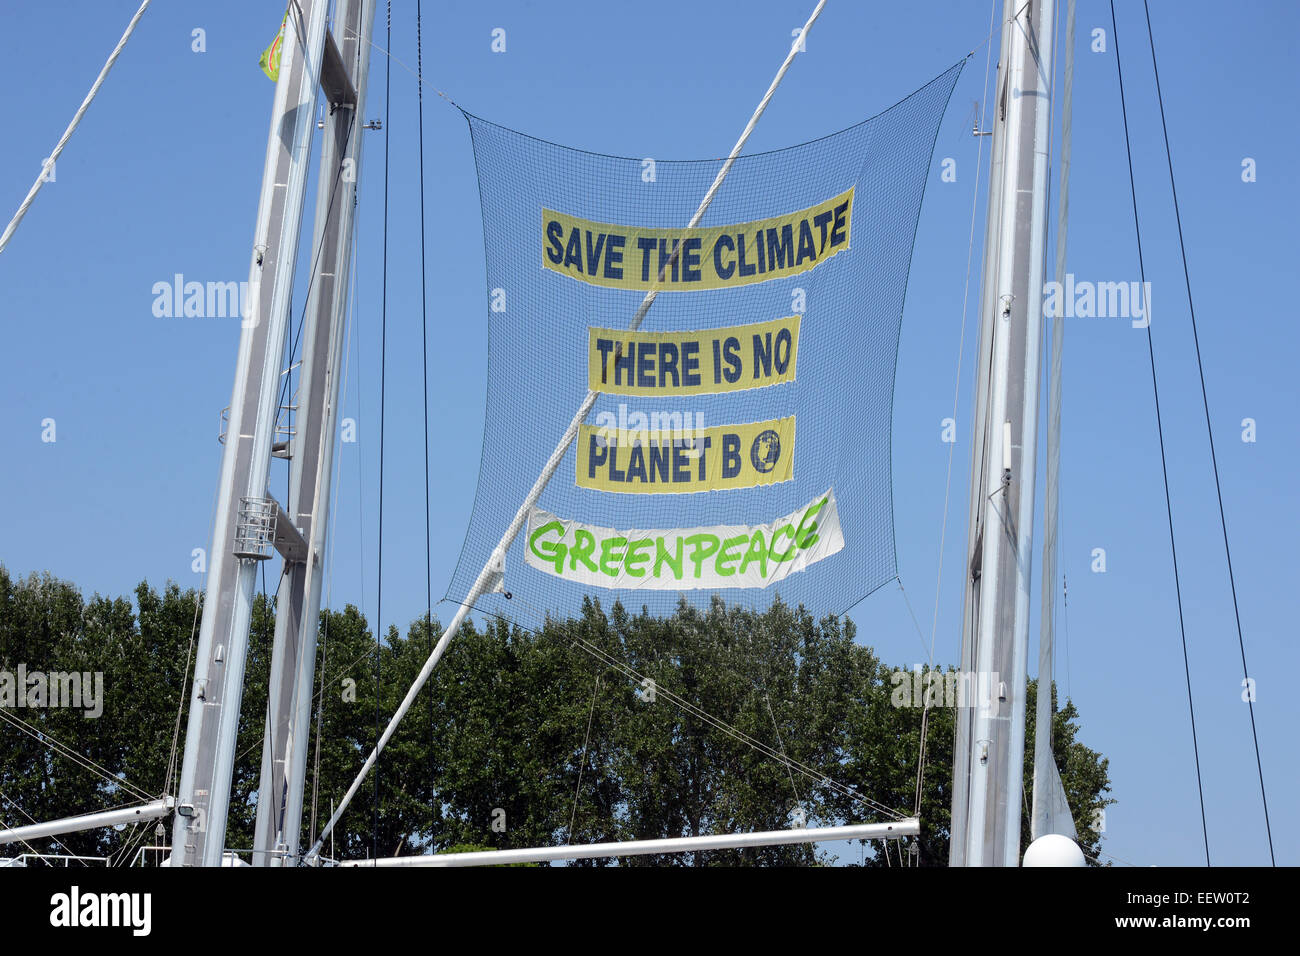 Greenpeace Rainbow Warrior ship Mast with a slogan 'Save the climate there is no planet B' Stock Photo